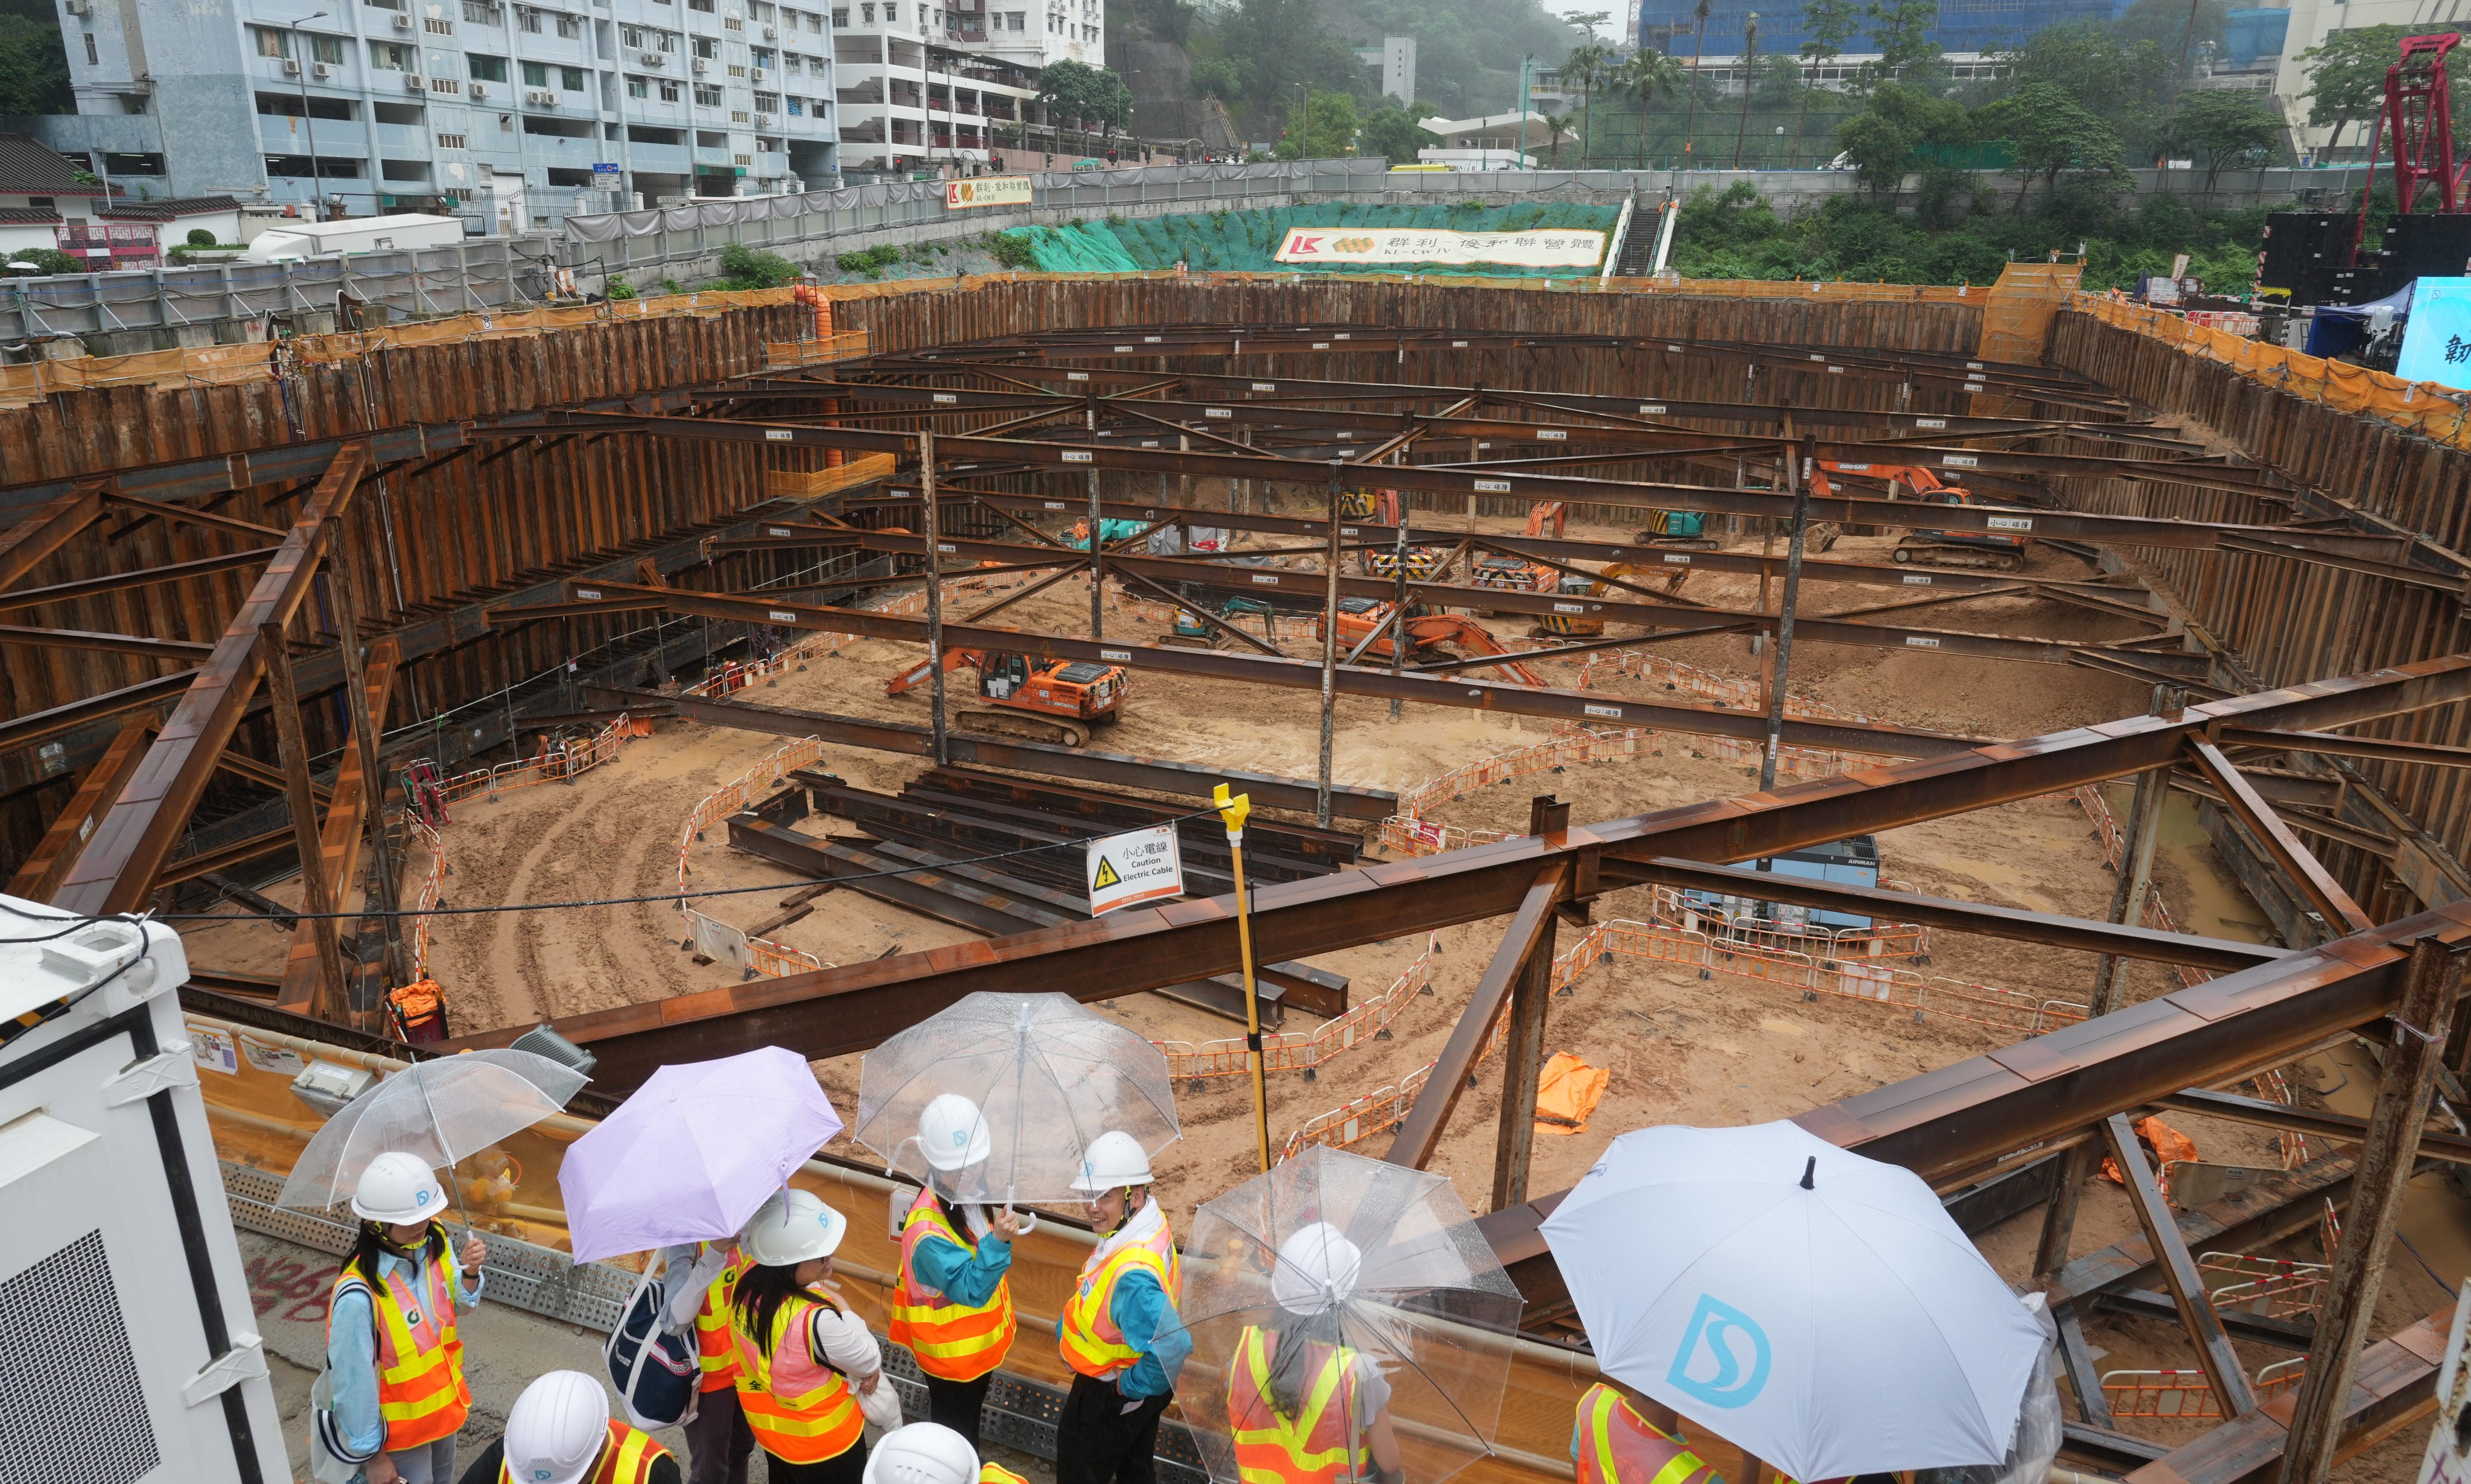 The Drainage Services Department also unveiled a stormwater storage tank in Kwun Tong as part of efforts to manage floods. Photo: Sam Tsang